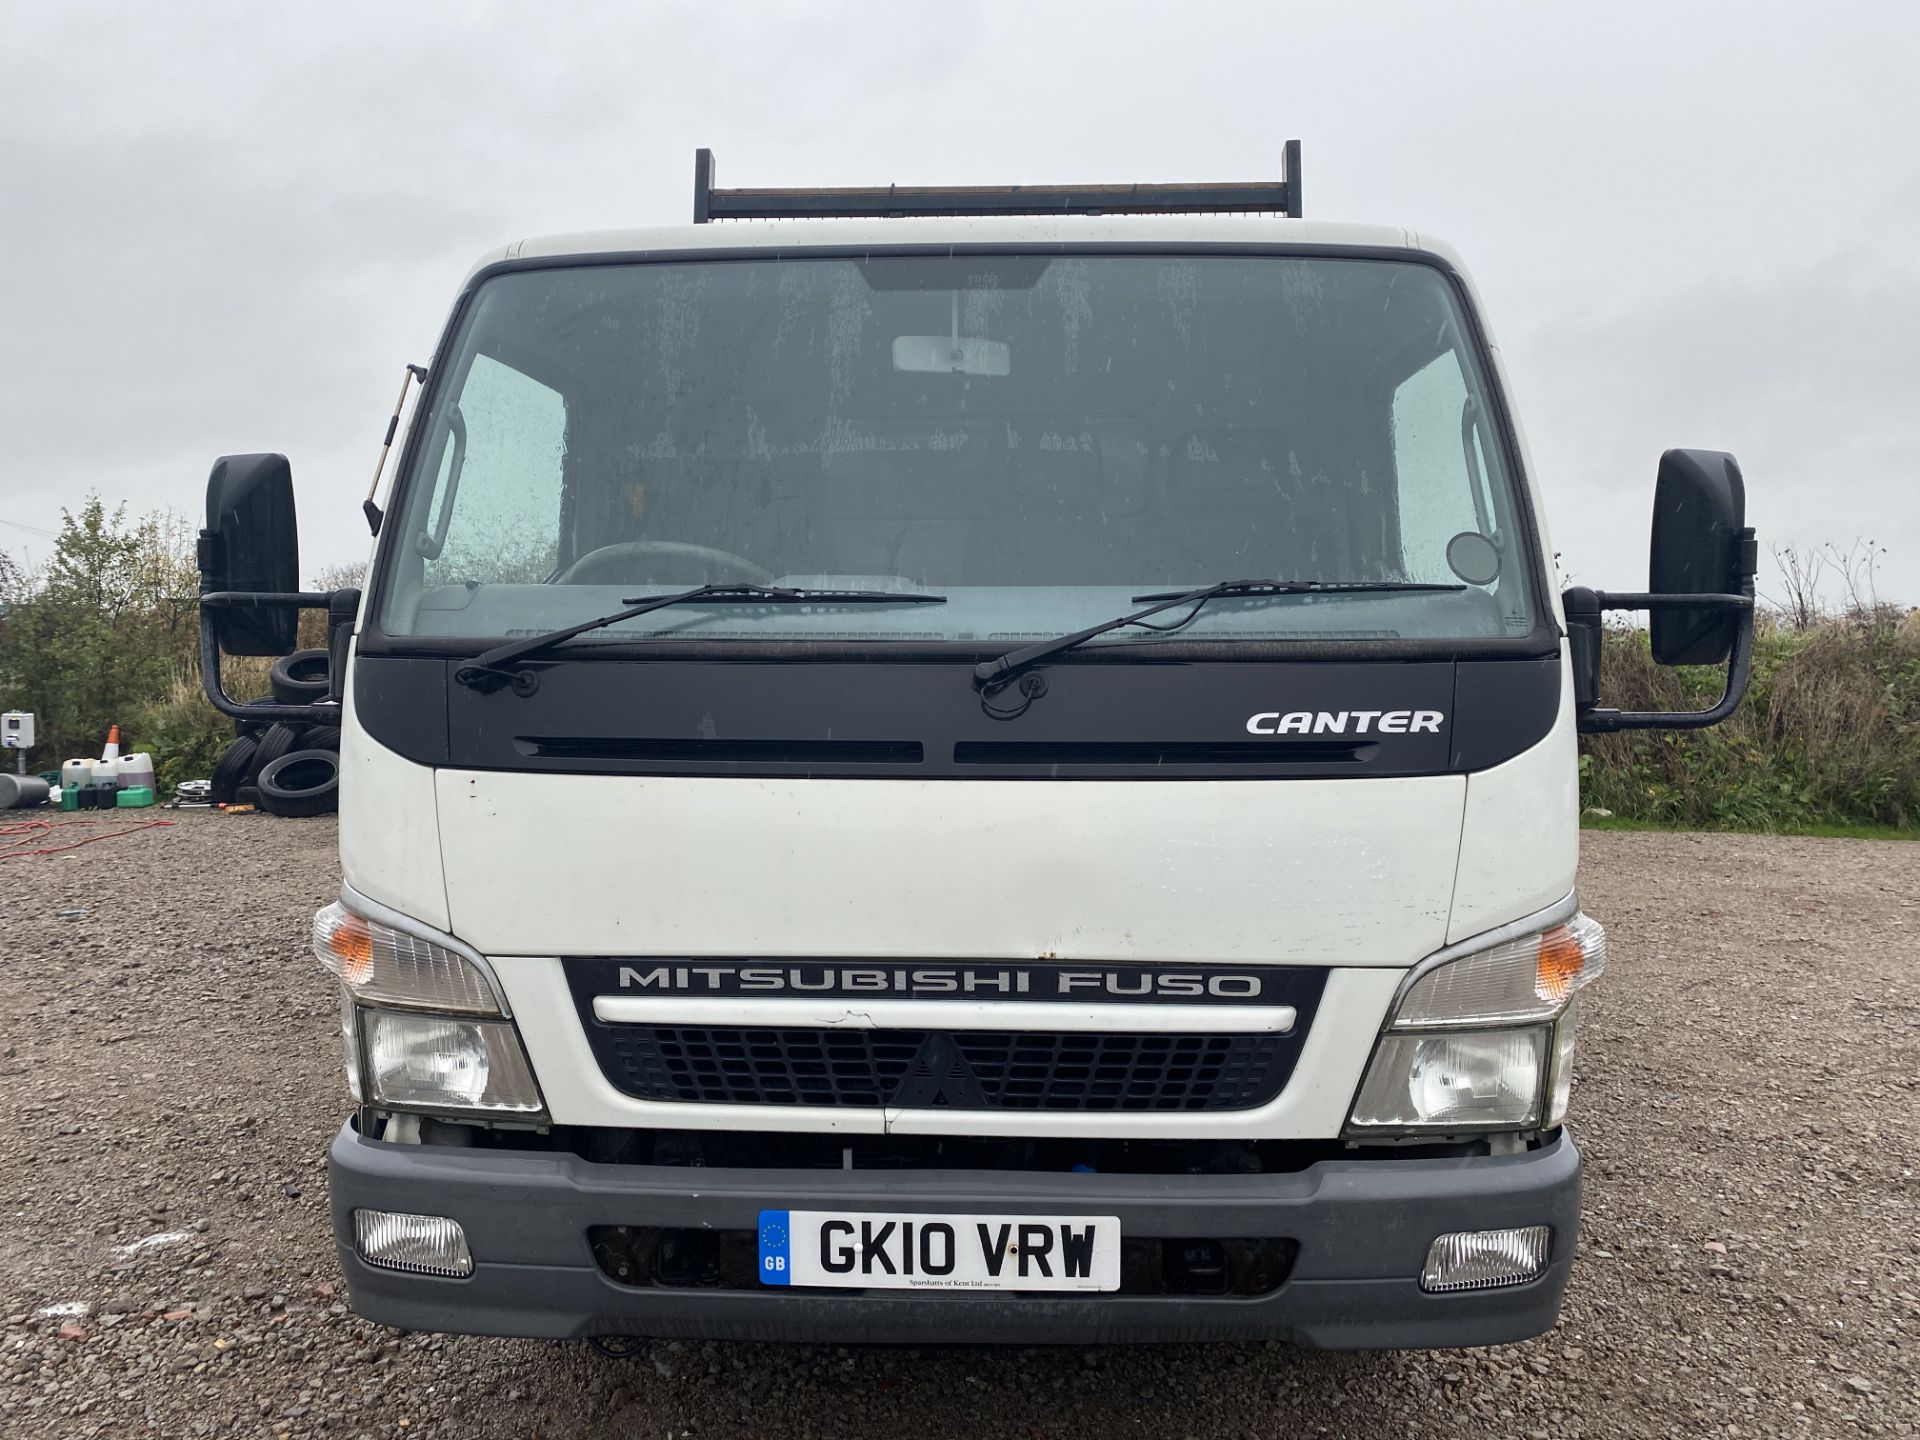 (ON SALE) MITSUBISHI CANTER 7C18 TIPPER TRUCK - 10 REG - 7500KG TIPPER - MANUAL GEARBOX - LOW MILES - Image 3 of 15